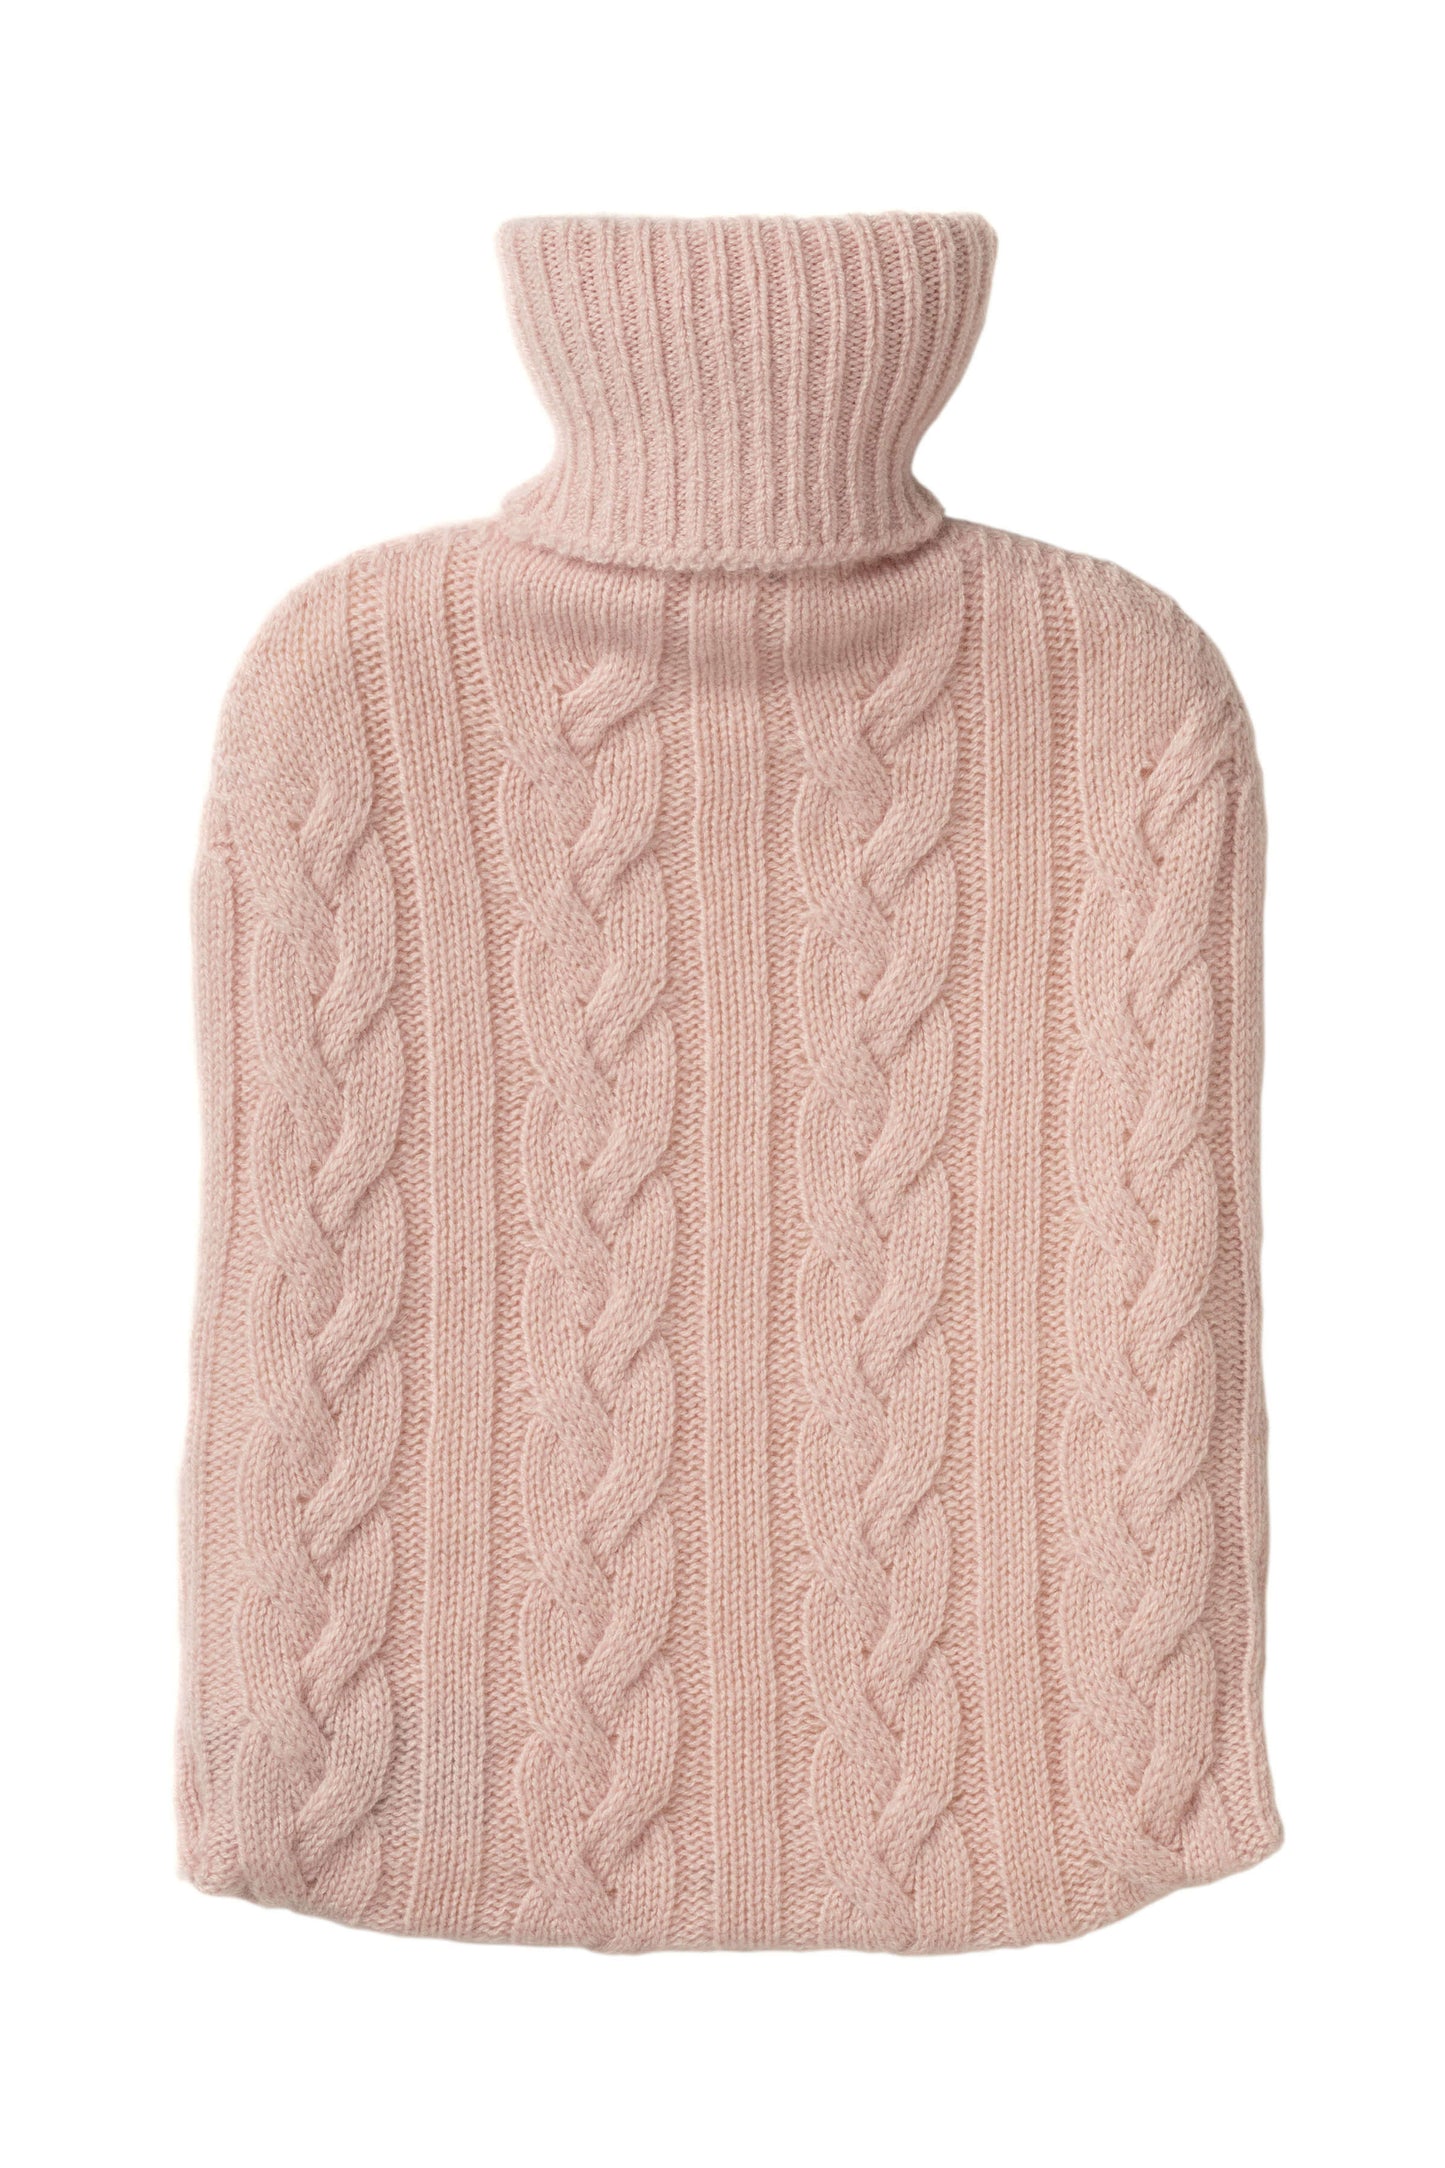 Johnstons of Elgin Cashmere Cable Hot Water Bottle Cover in Blush Pink  PA000008SE0566